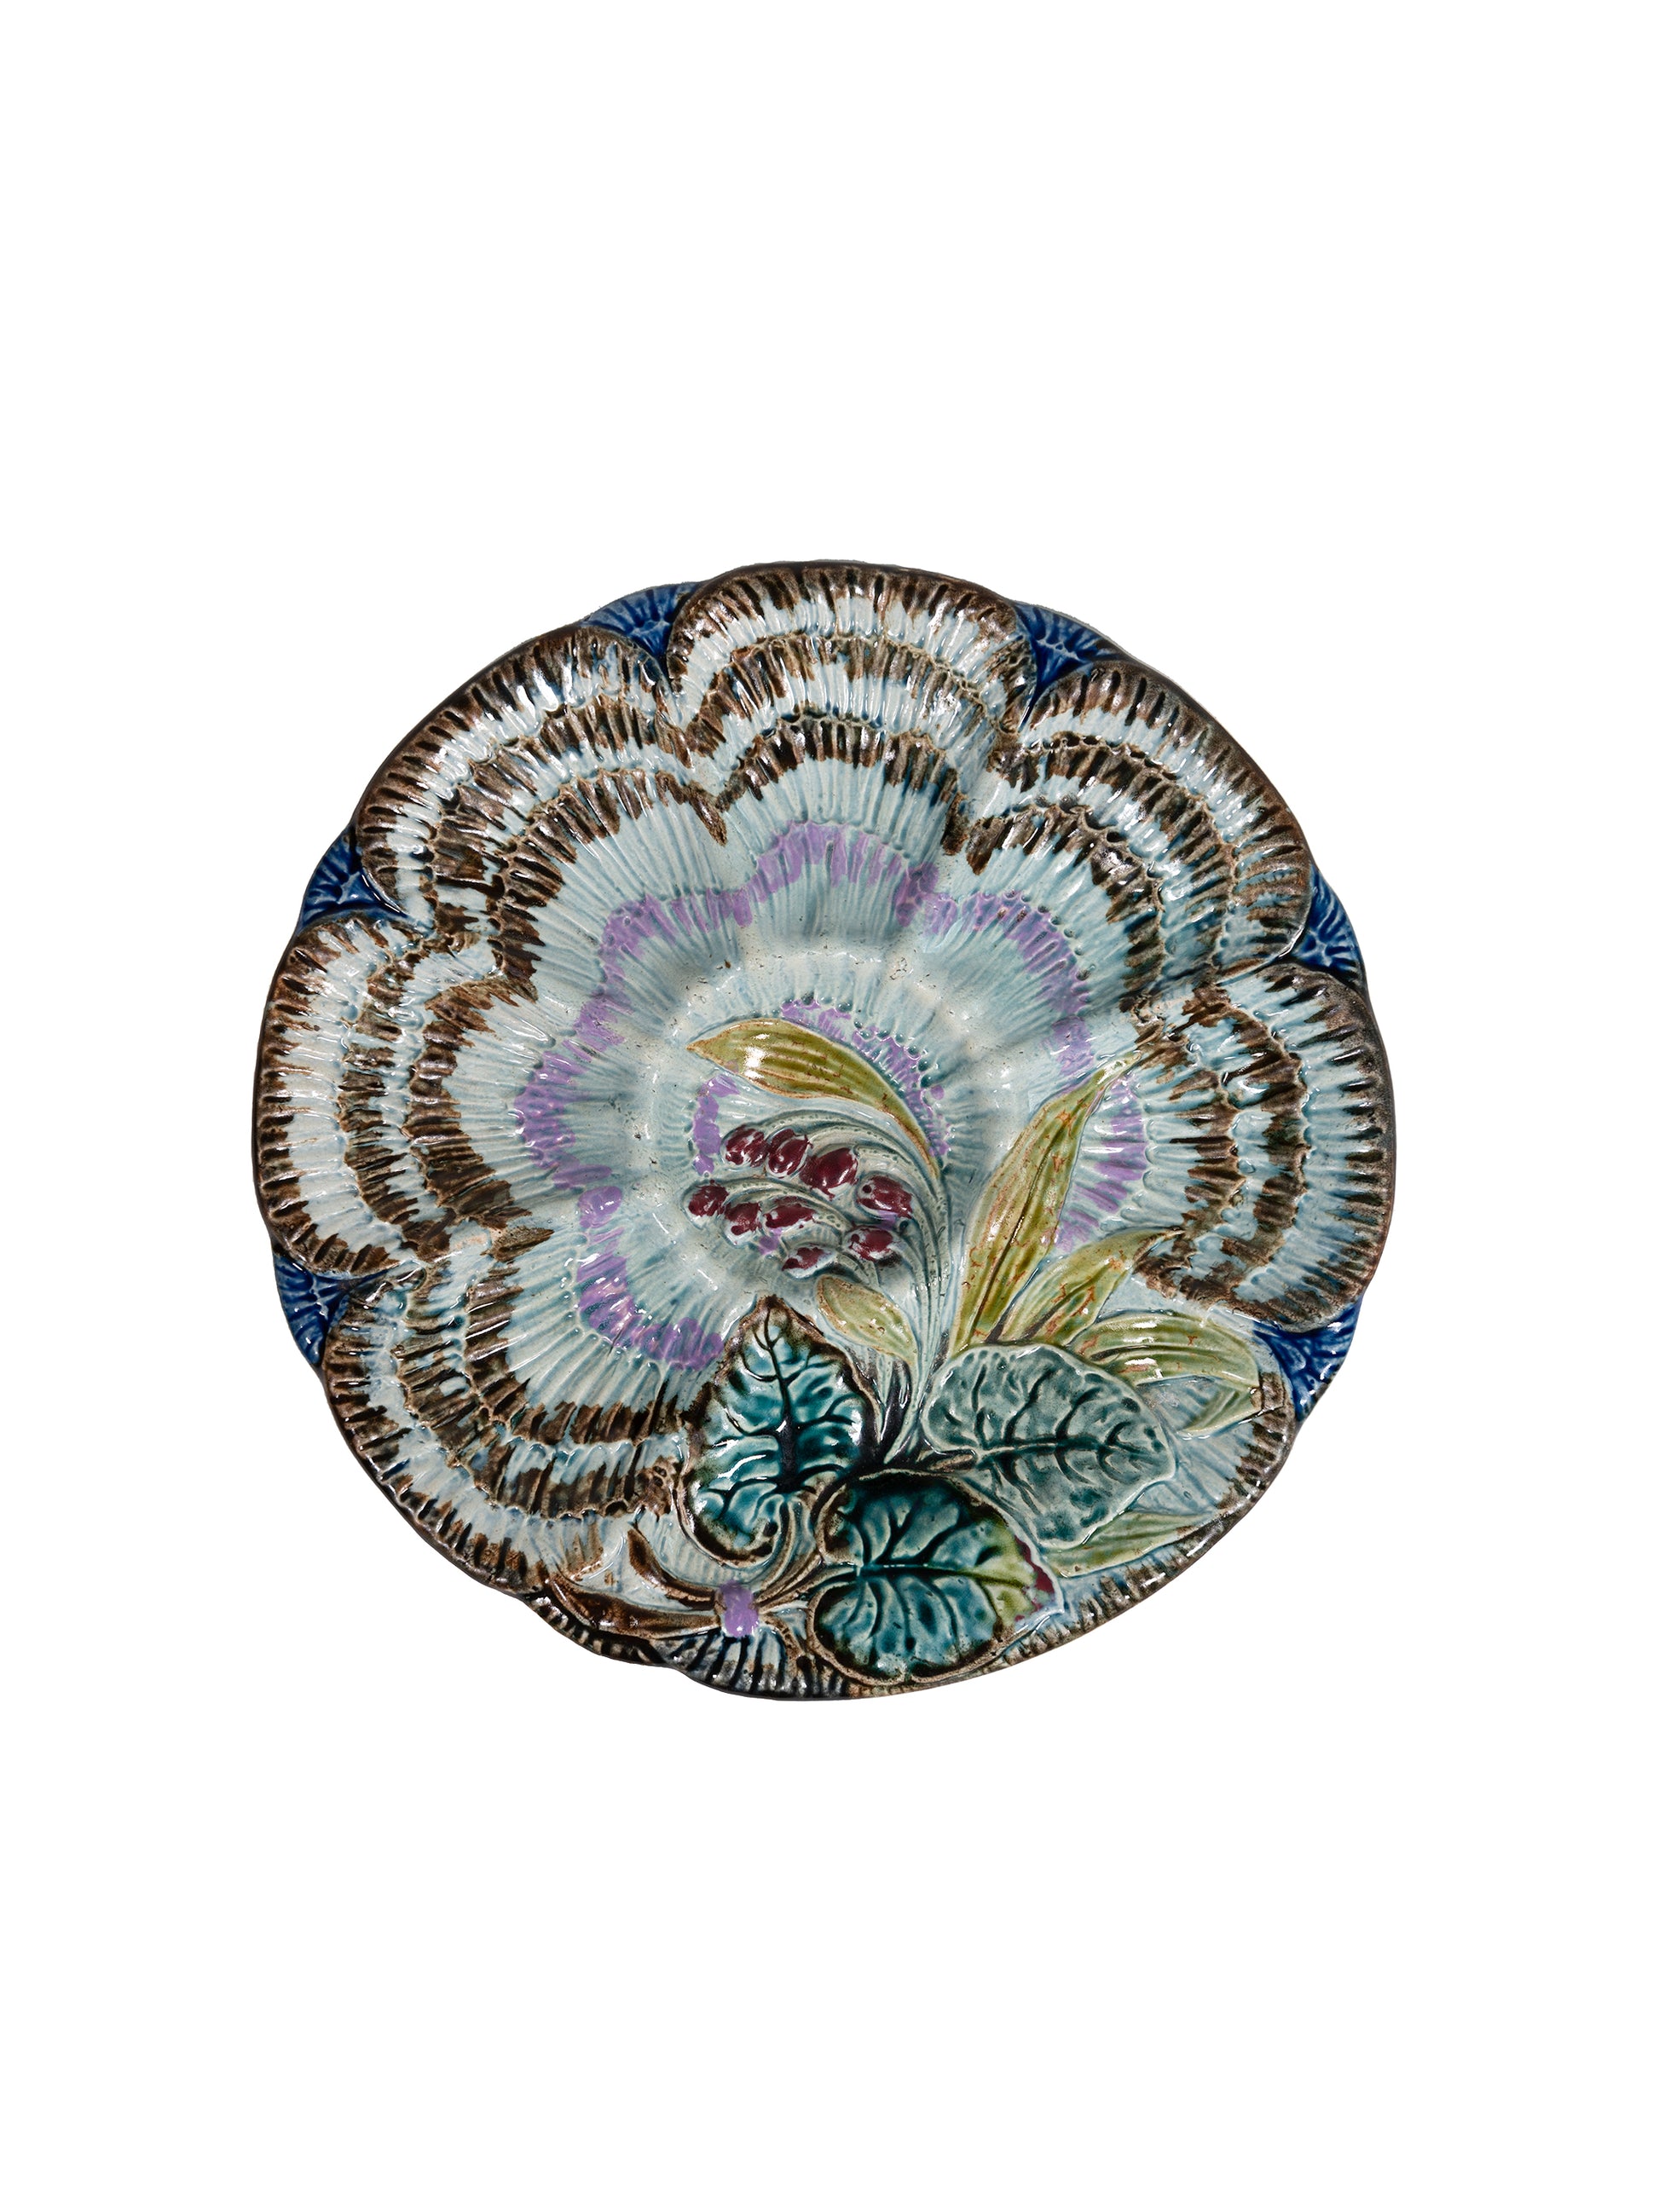 Vintage 1880s Wasmuel Oyster Plate 3 Weston Table 